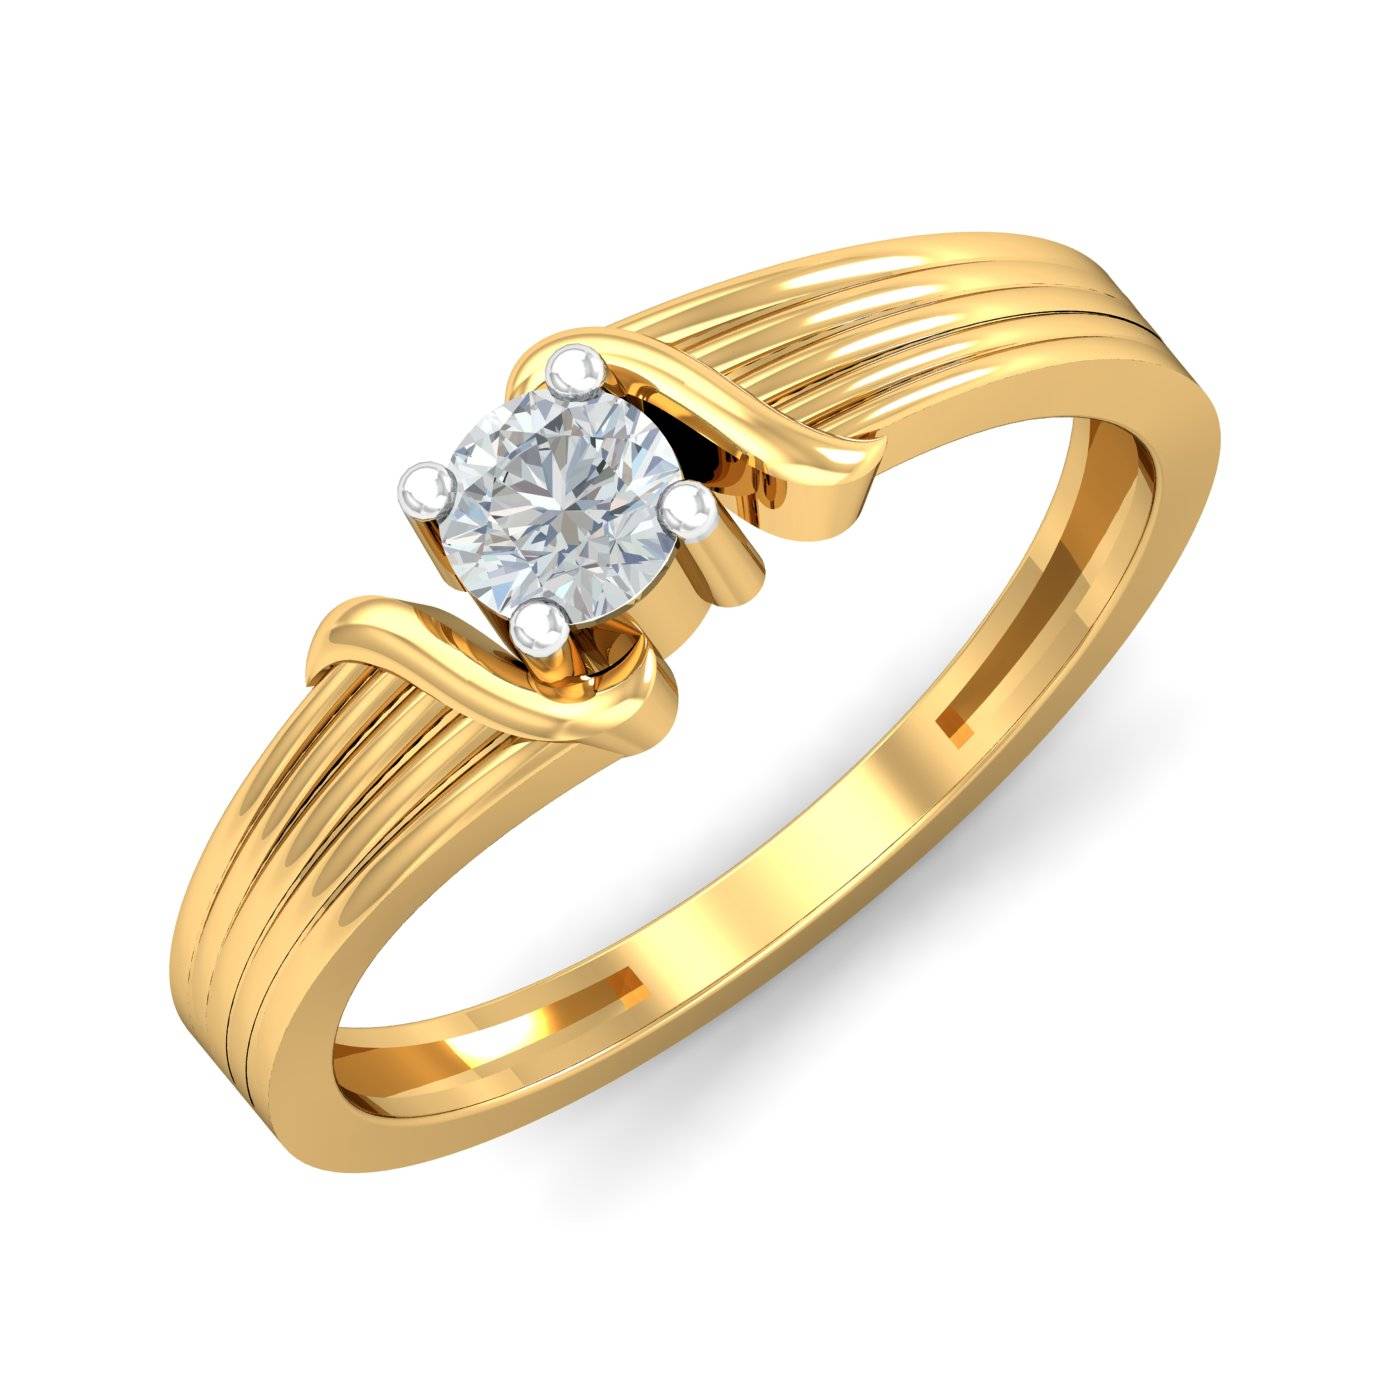 Esmee's Solitaire Ring